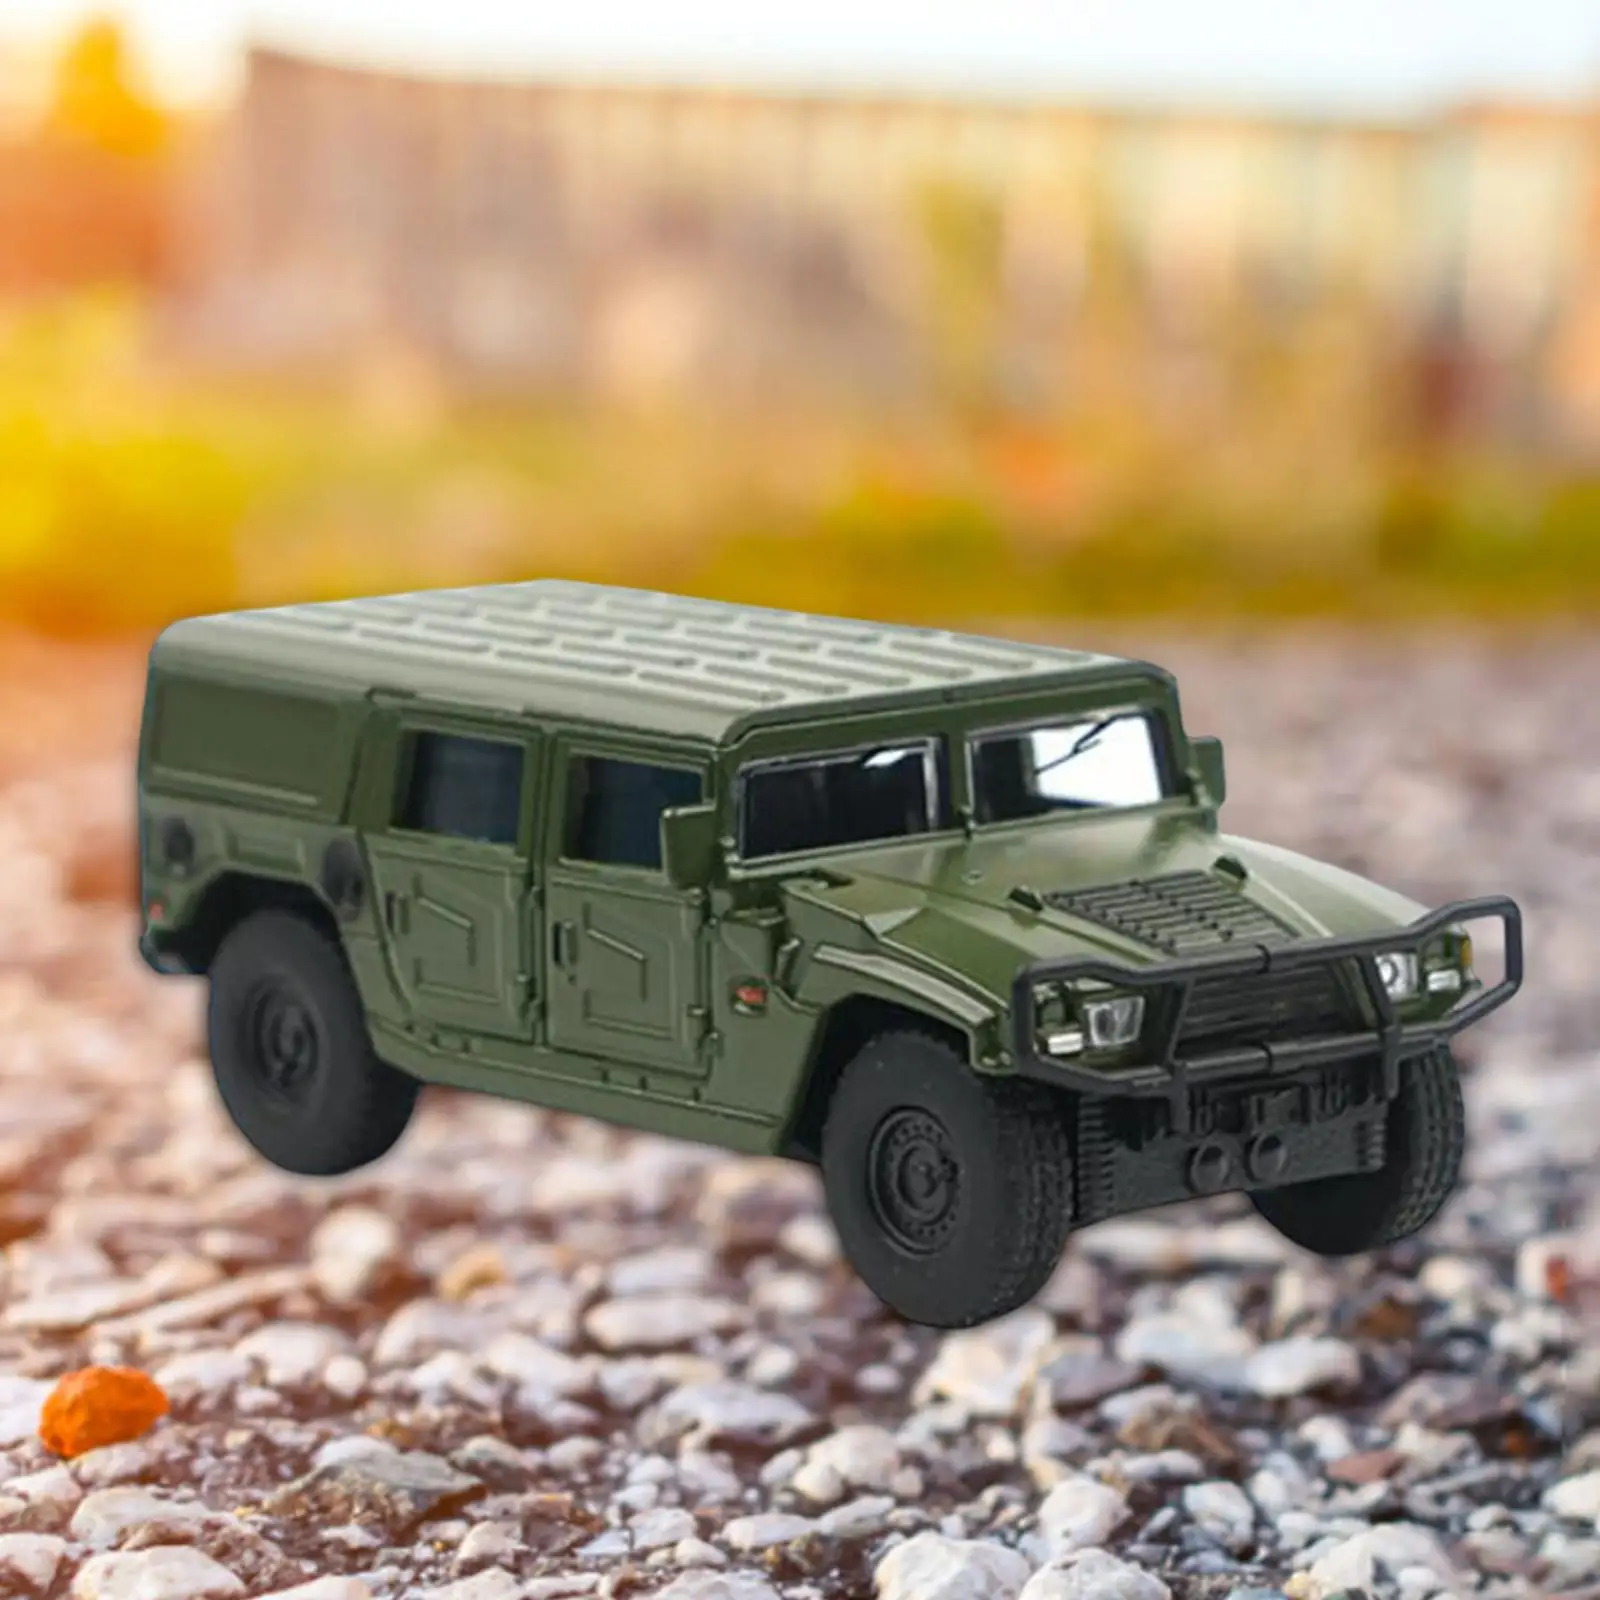 1/64 Miniature Car Toys Children Gifts Simulation Collectibles for Scenery Landscape Photography Props Diorama Layout Decoration